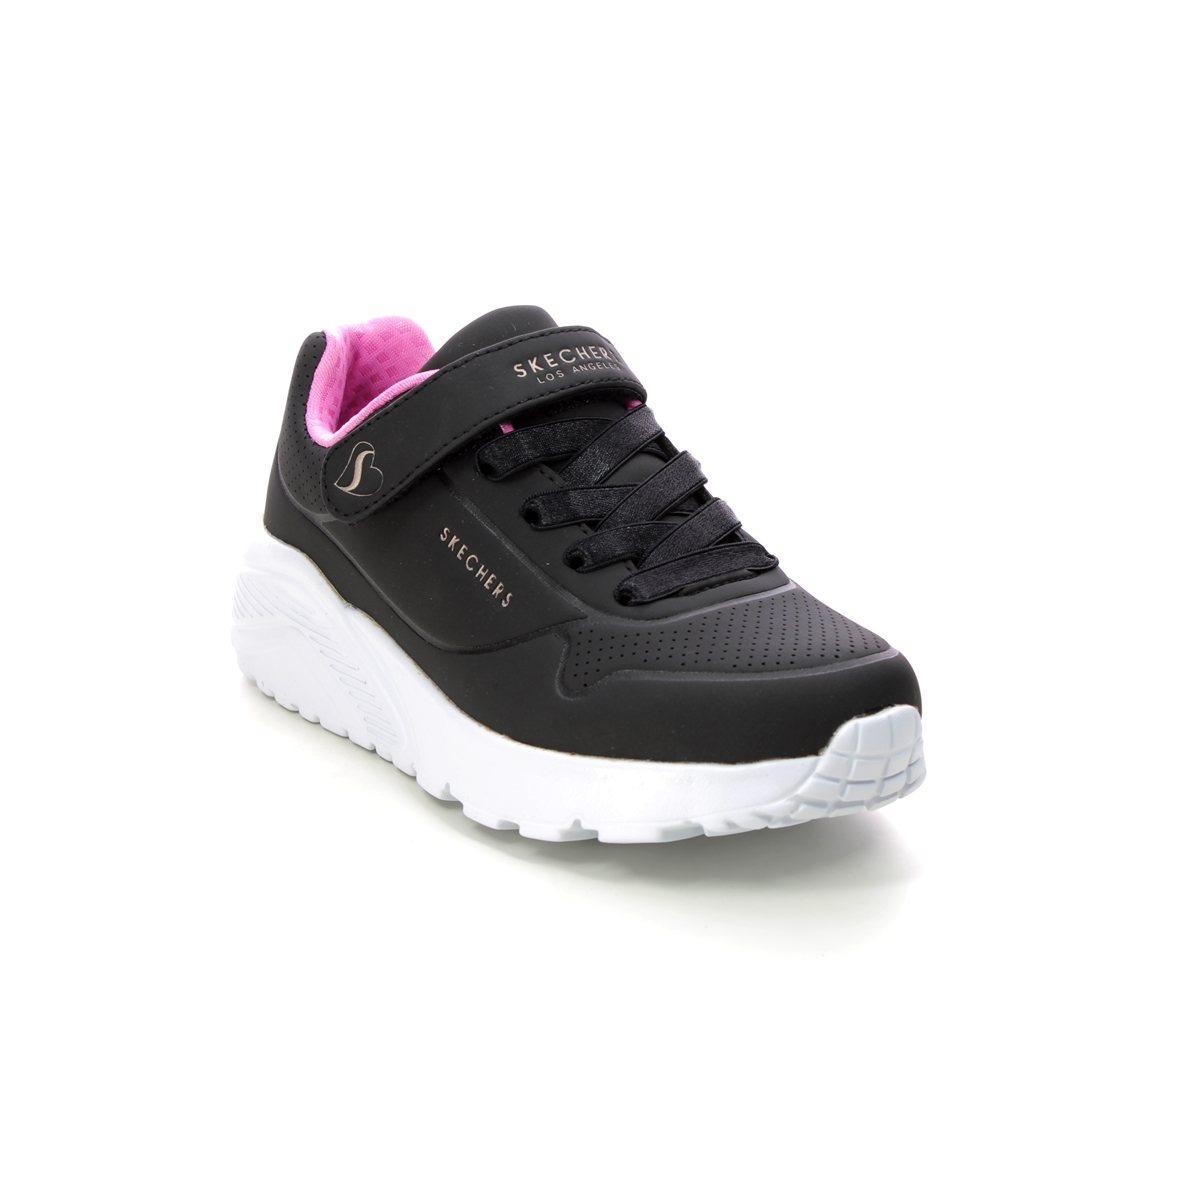 Skechers Uno Lite Bungee Black Rose Gold Kids Girls Trainers 310451L In Size 37 In Plain Black Rose Gold For kids